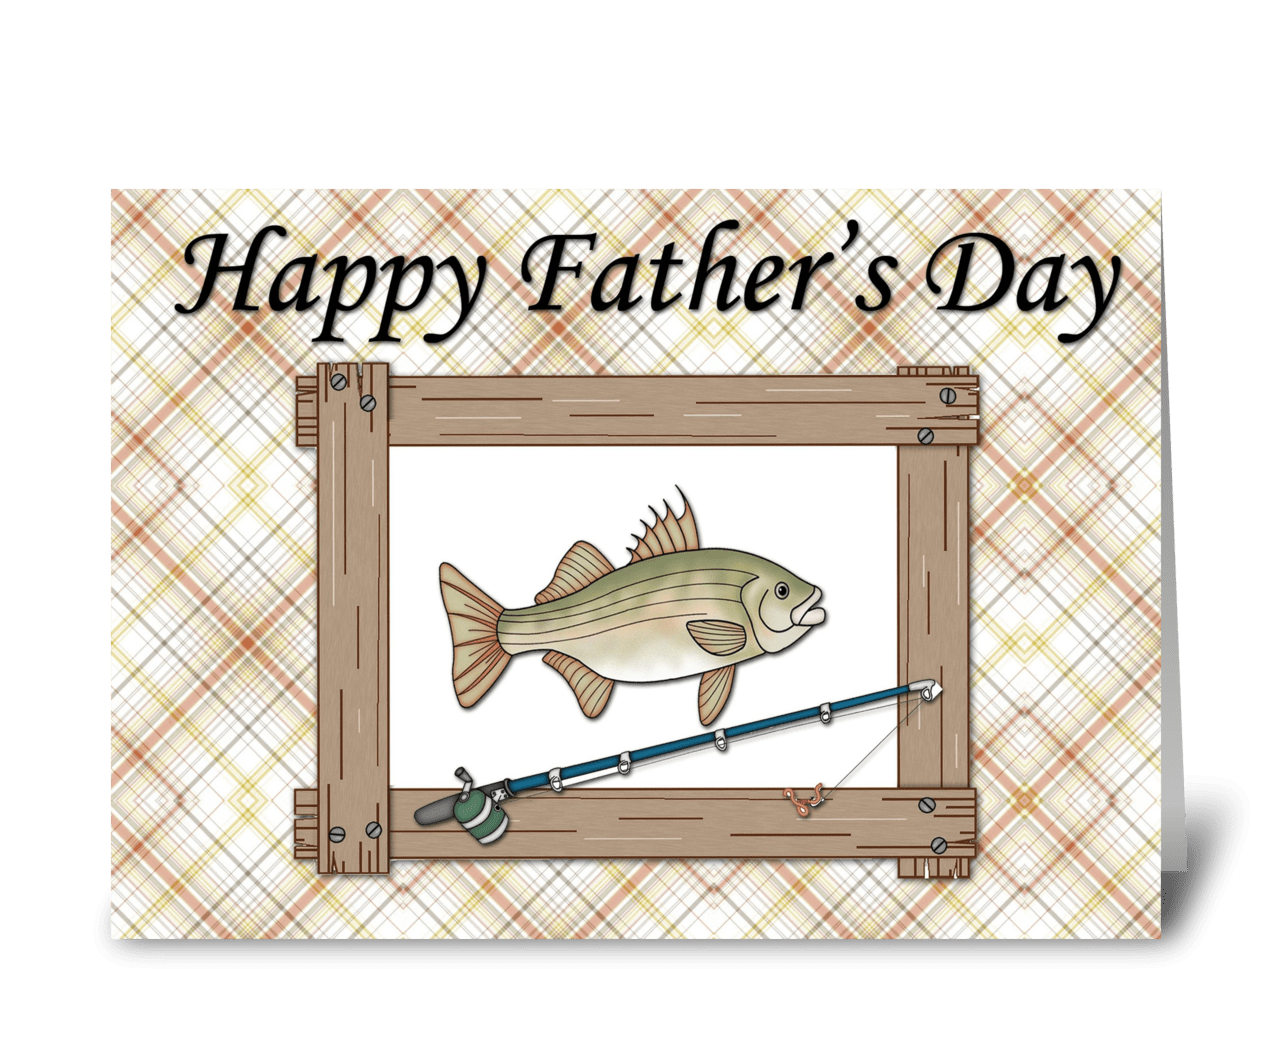 Details about   FATHER'S DAY River Canoe Fishing Mountains Greeting Card FROM SON LARGE 